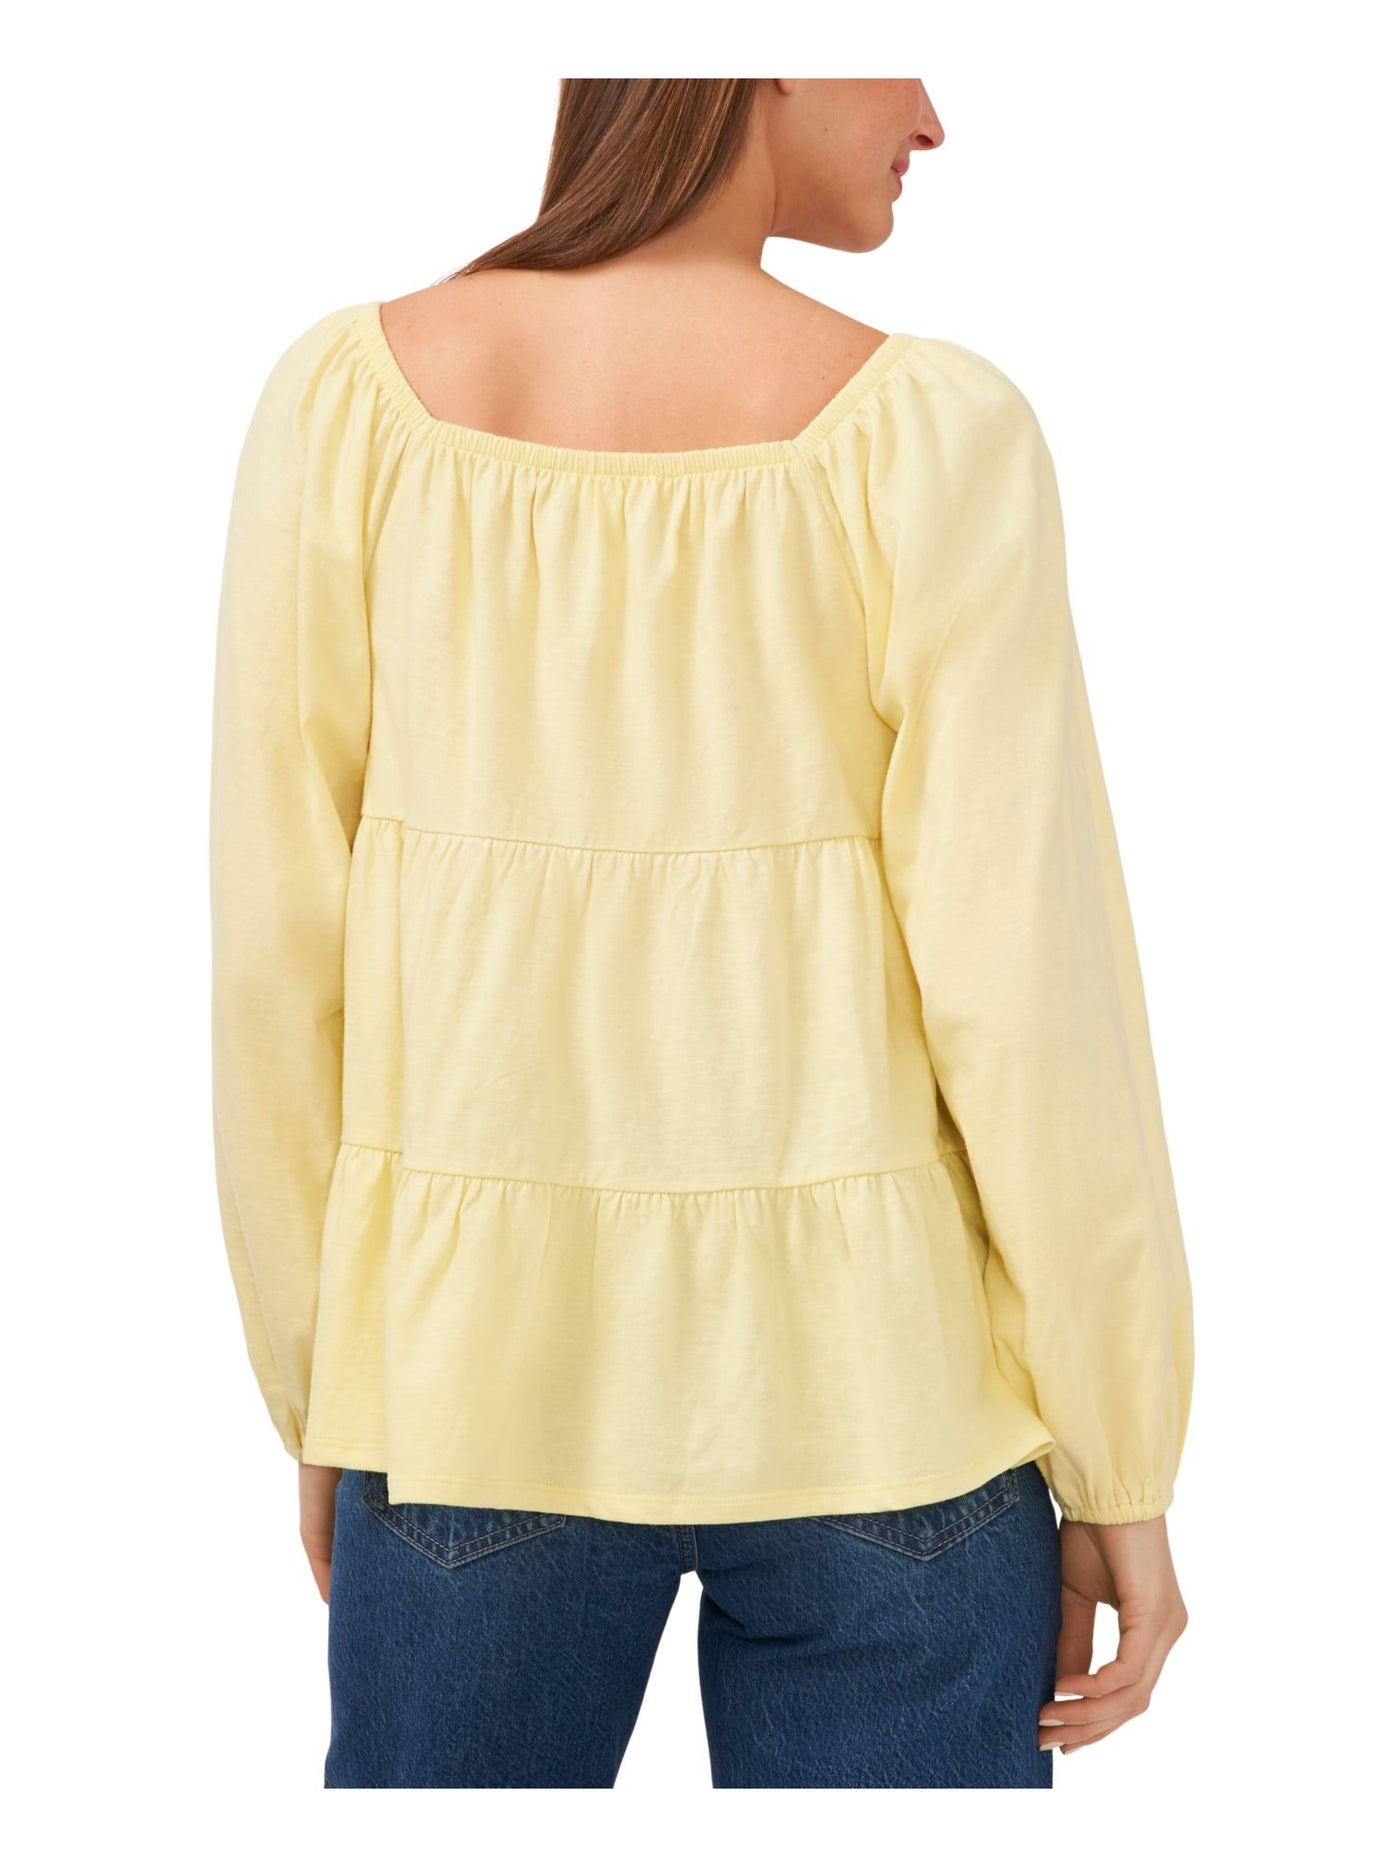 RILEY&RAE Womens Yellow Long Sleeve Square Neck Blouse XS